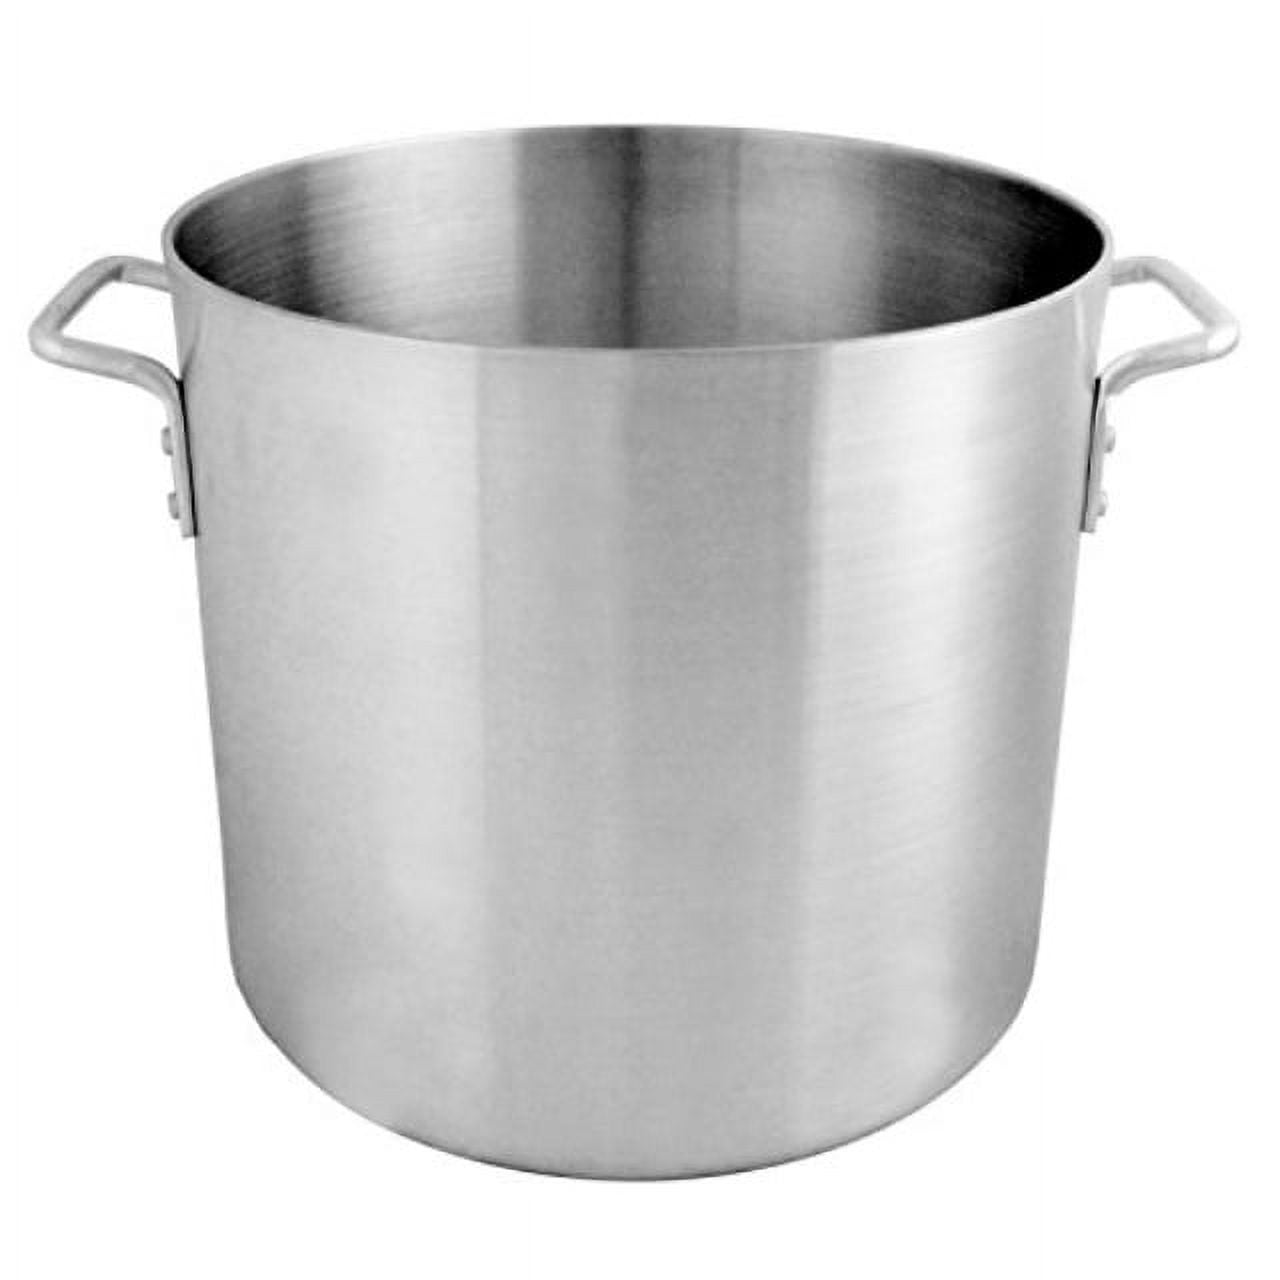 Thunder Group Stainless Steel Stock Pot Lid, 13-Inch